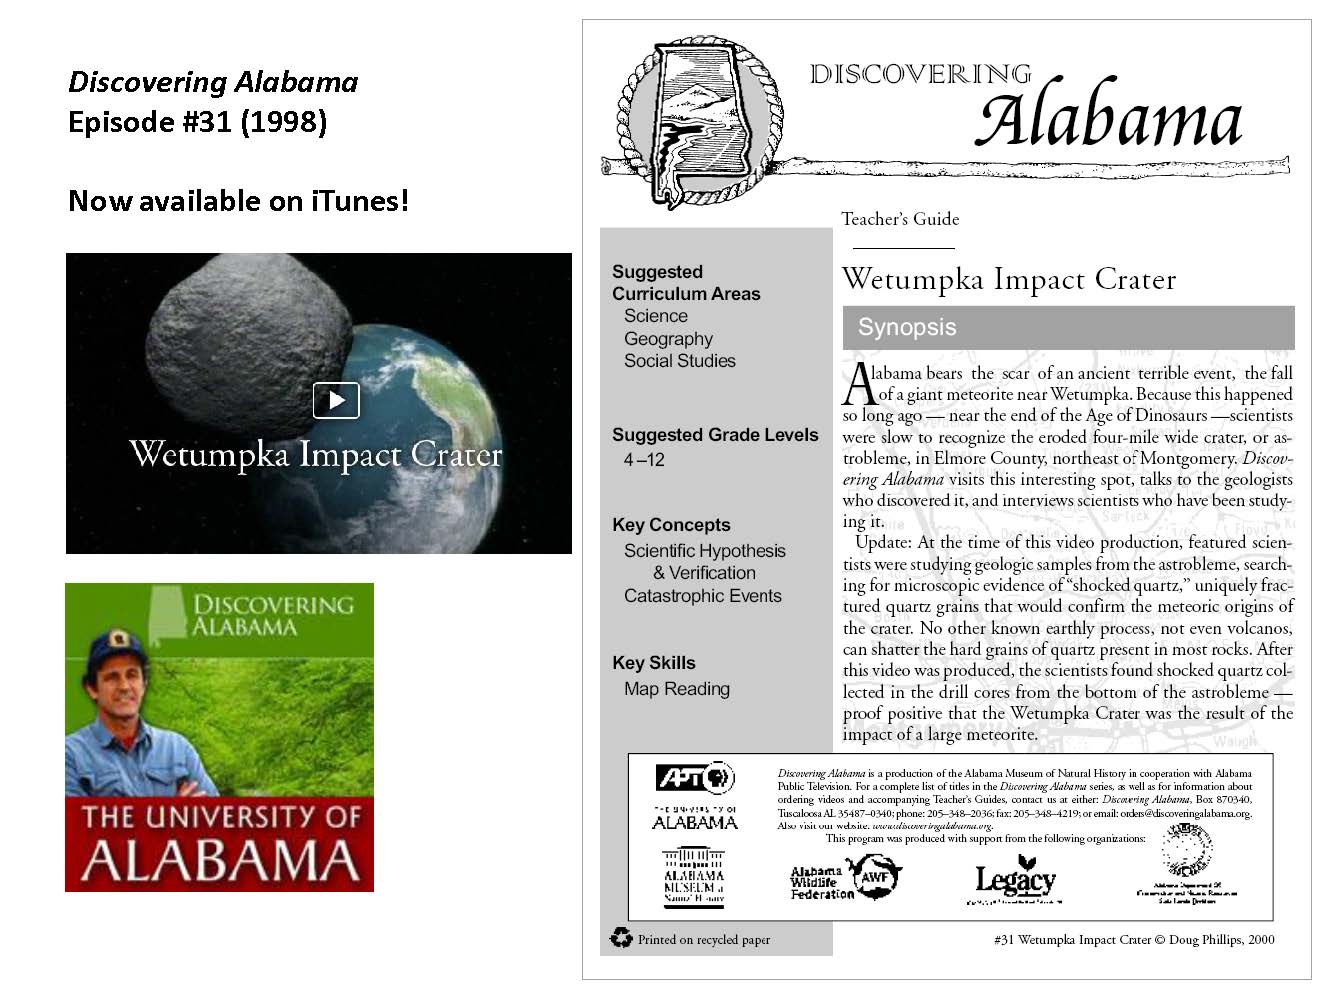 Discovering Alabama Podcast featured the Wetumpka crater in Episode 31